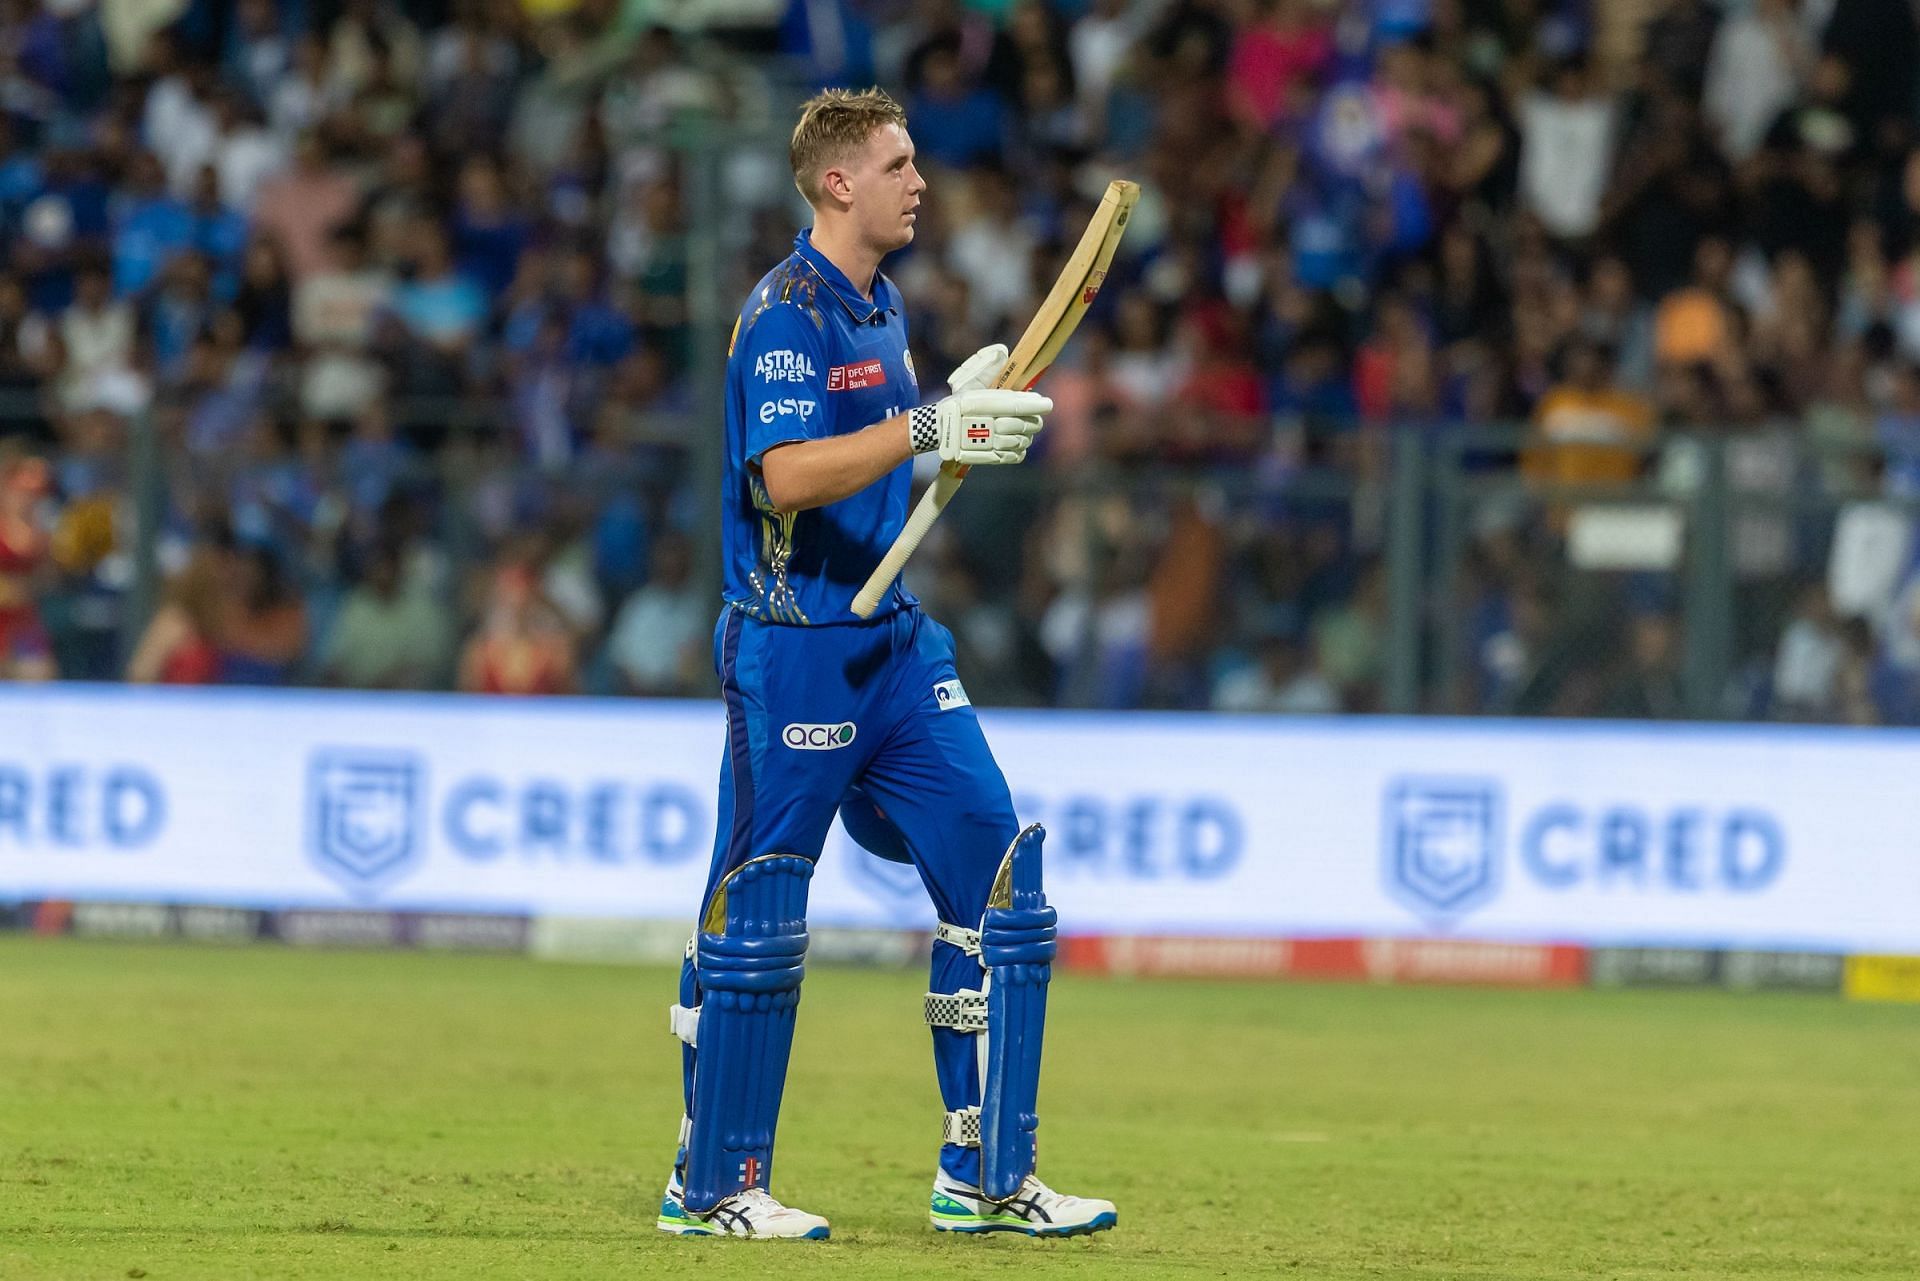 Cameron Green leaves the field after a fabulous knock for Mumbai Indian (PC: Twitter/IPL)